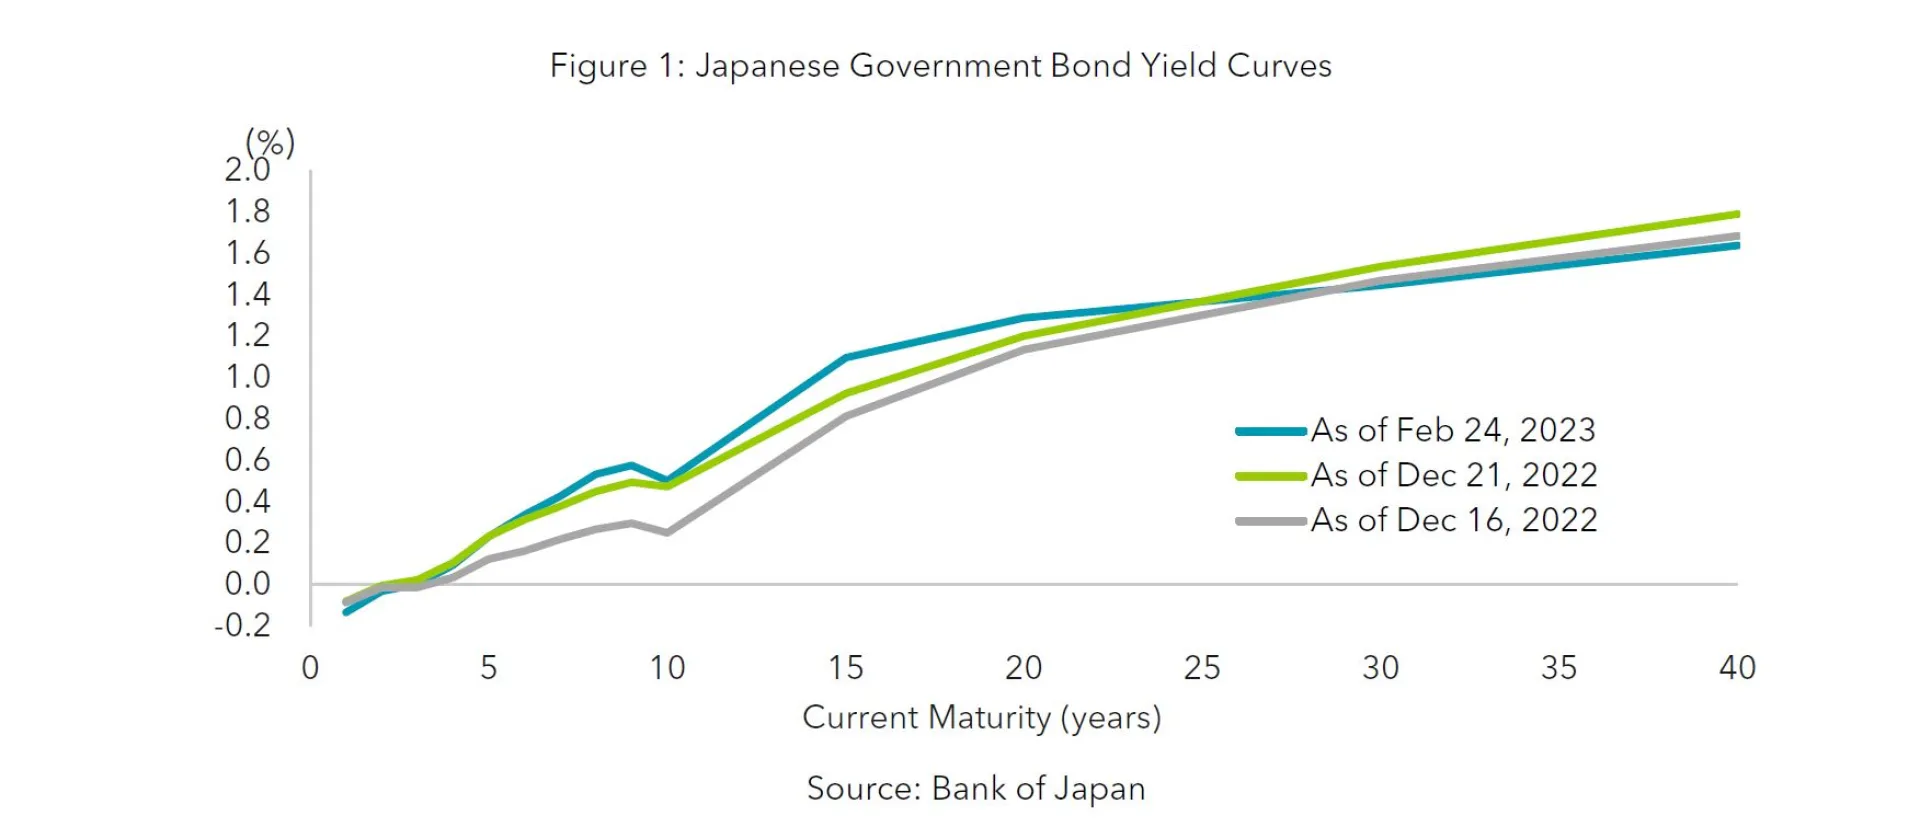 Figure 1 - Japanese Government Bond Yield Curves